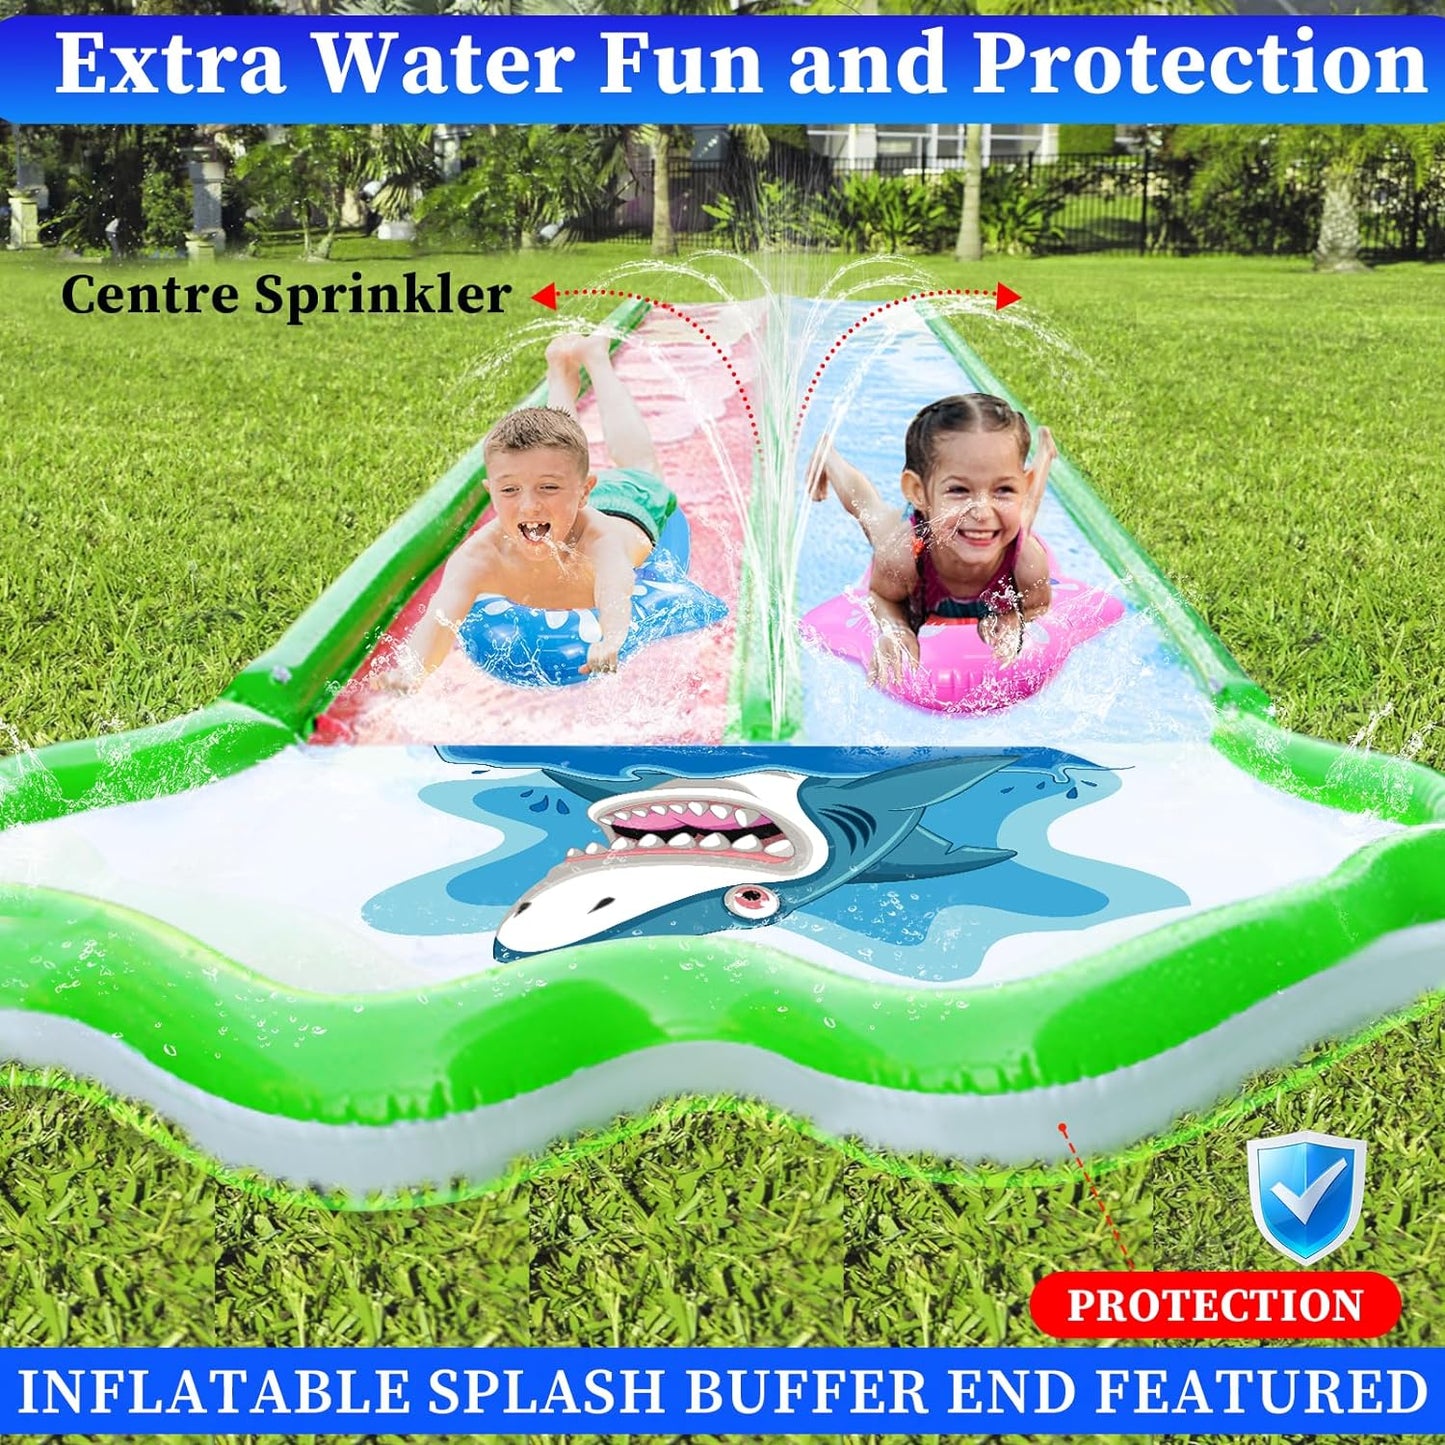 Slip and Slide Lawn Water Slides - Inflatable Heavy Duty Slip Slides with 2 Bodyboards,20X6Ft 10 Lb,Lawn Waterslide Summer Water Toy with Sprinkler for Kids Backyard Yard Outdoor Summer Party Play